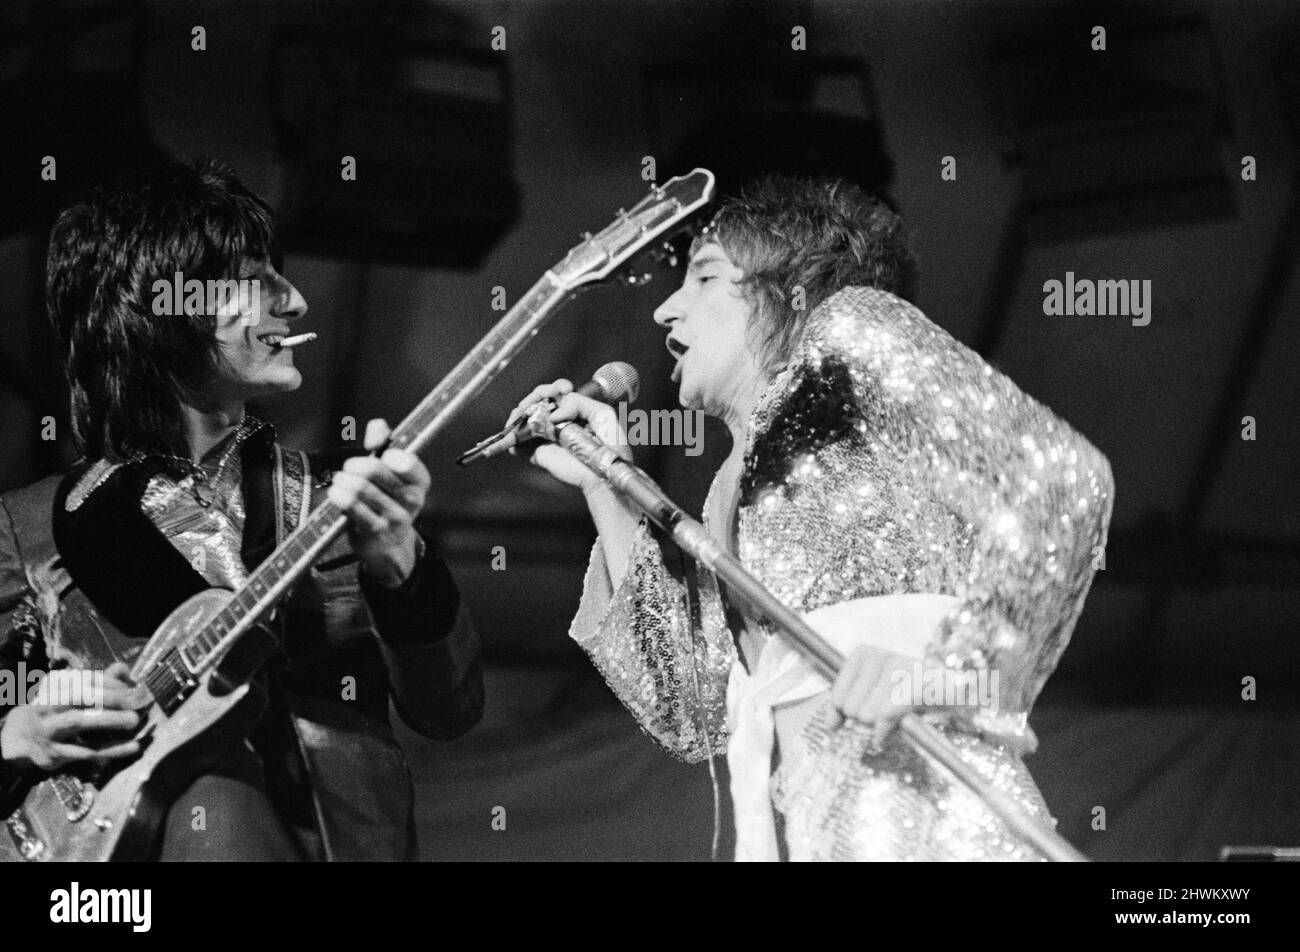 The Faces featuring Rod Stewart perform at The Reading Festival Saturday August 12th 1972. Picture shows guitarist Ronnie Wood and lead singer Rod Stewart  The Faces headlined the second of three nights of what was then called the 12th National Jazz, Blues & Rock Festival, and held at Richfield Avenue.   Reading, Berkshire, England, Friday 11th, Saturday 12th and Sunday 13th.  The Faces closed their set with 'Maggie May', and the weekend event featured other acts such as Genesis, Elkie Brooks and Robert Palmer then in Vinegar Joe, Mungo Jerry, and Status Quo.  The Faces were Rod Stewart (lead Stock Photo